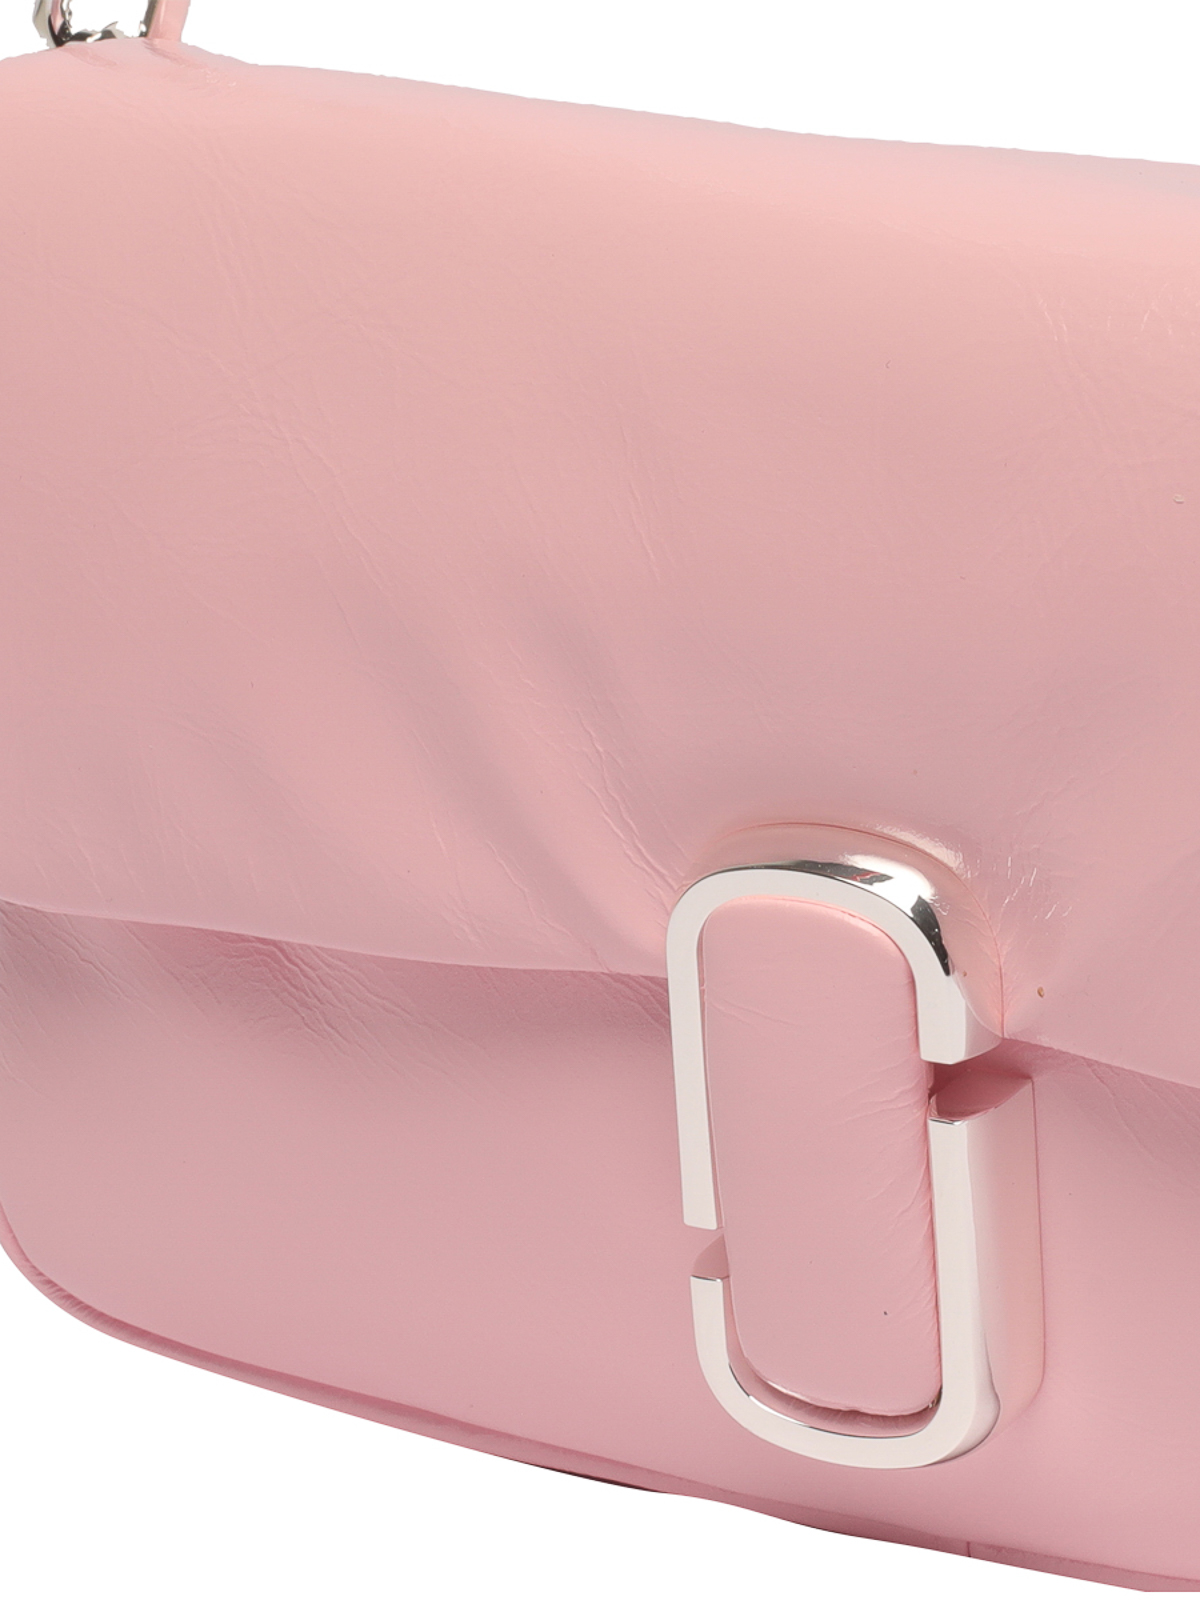 Marc Jacobs The Pillow Shoulder Bag In Pink